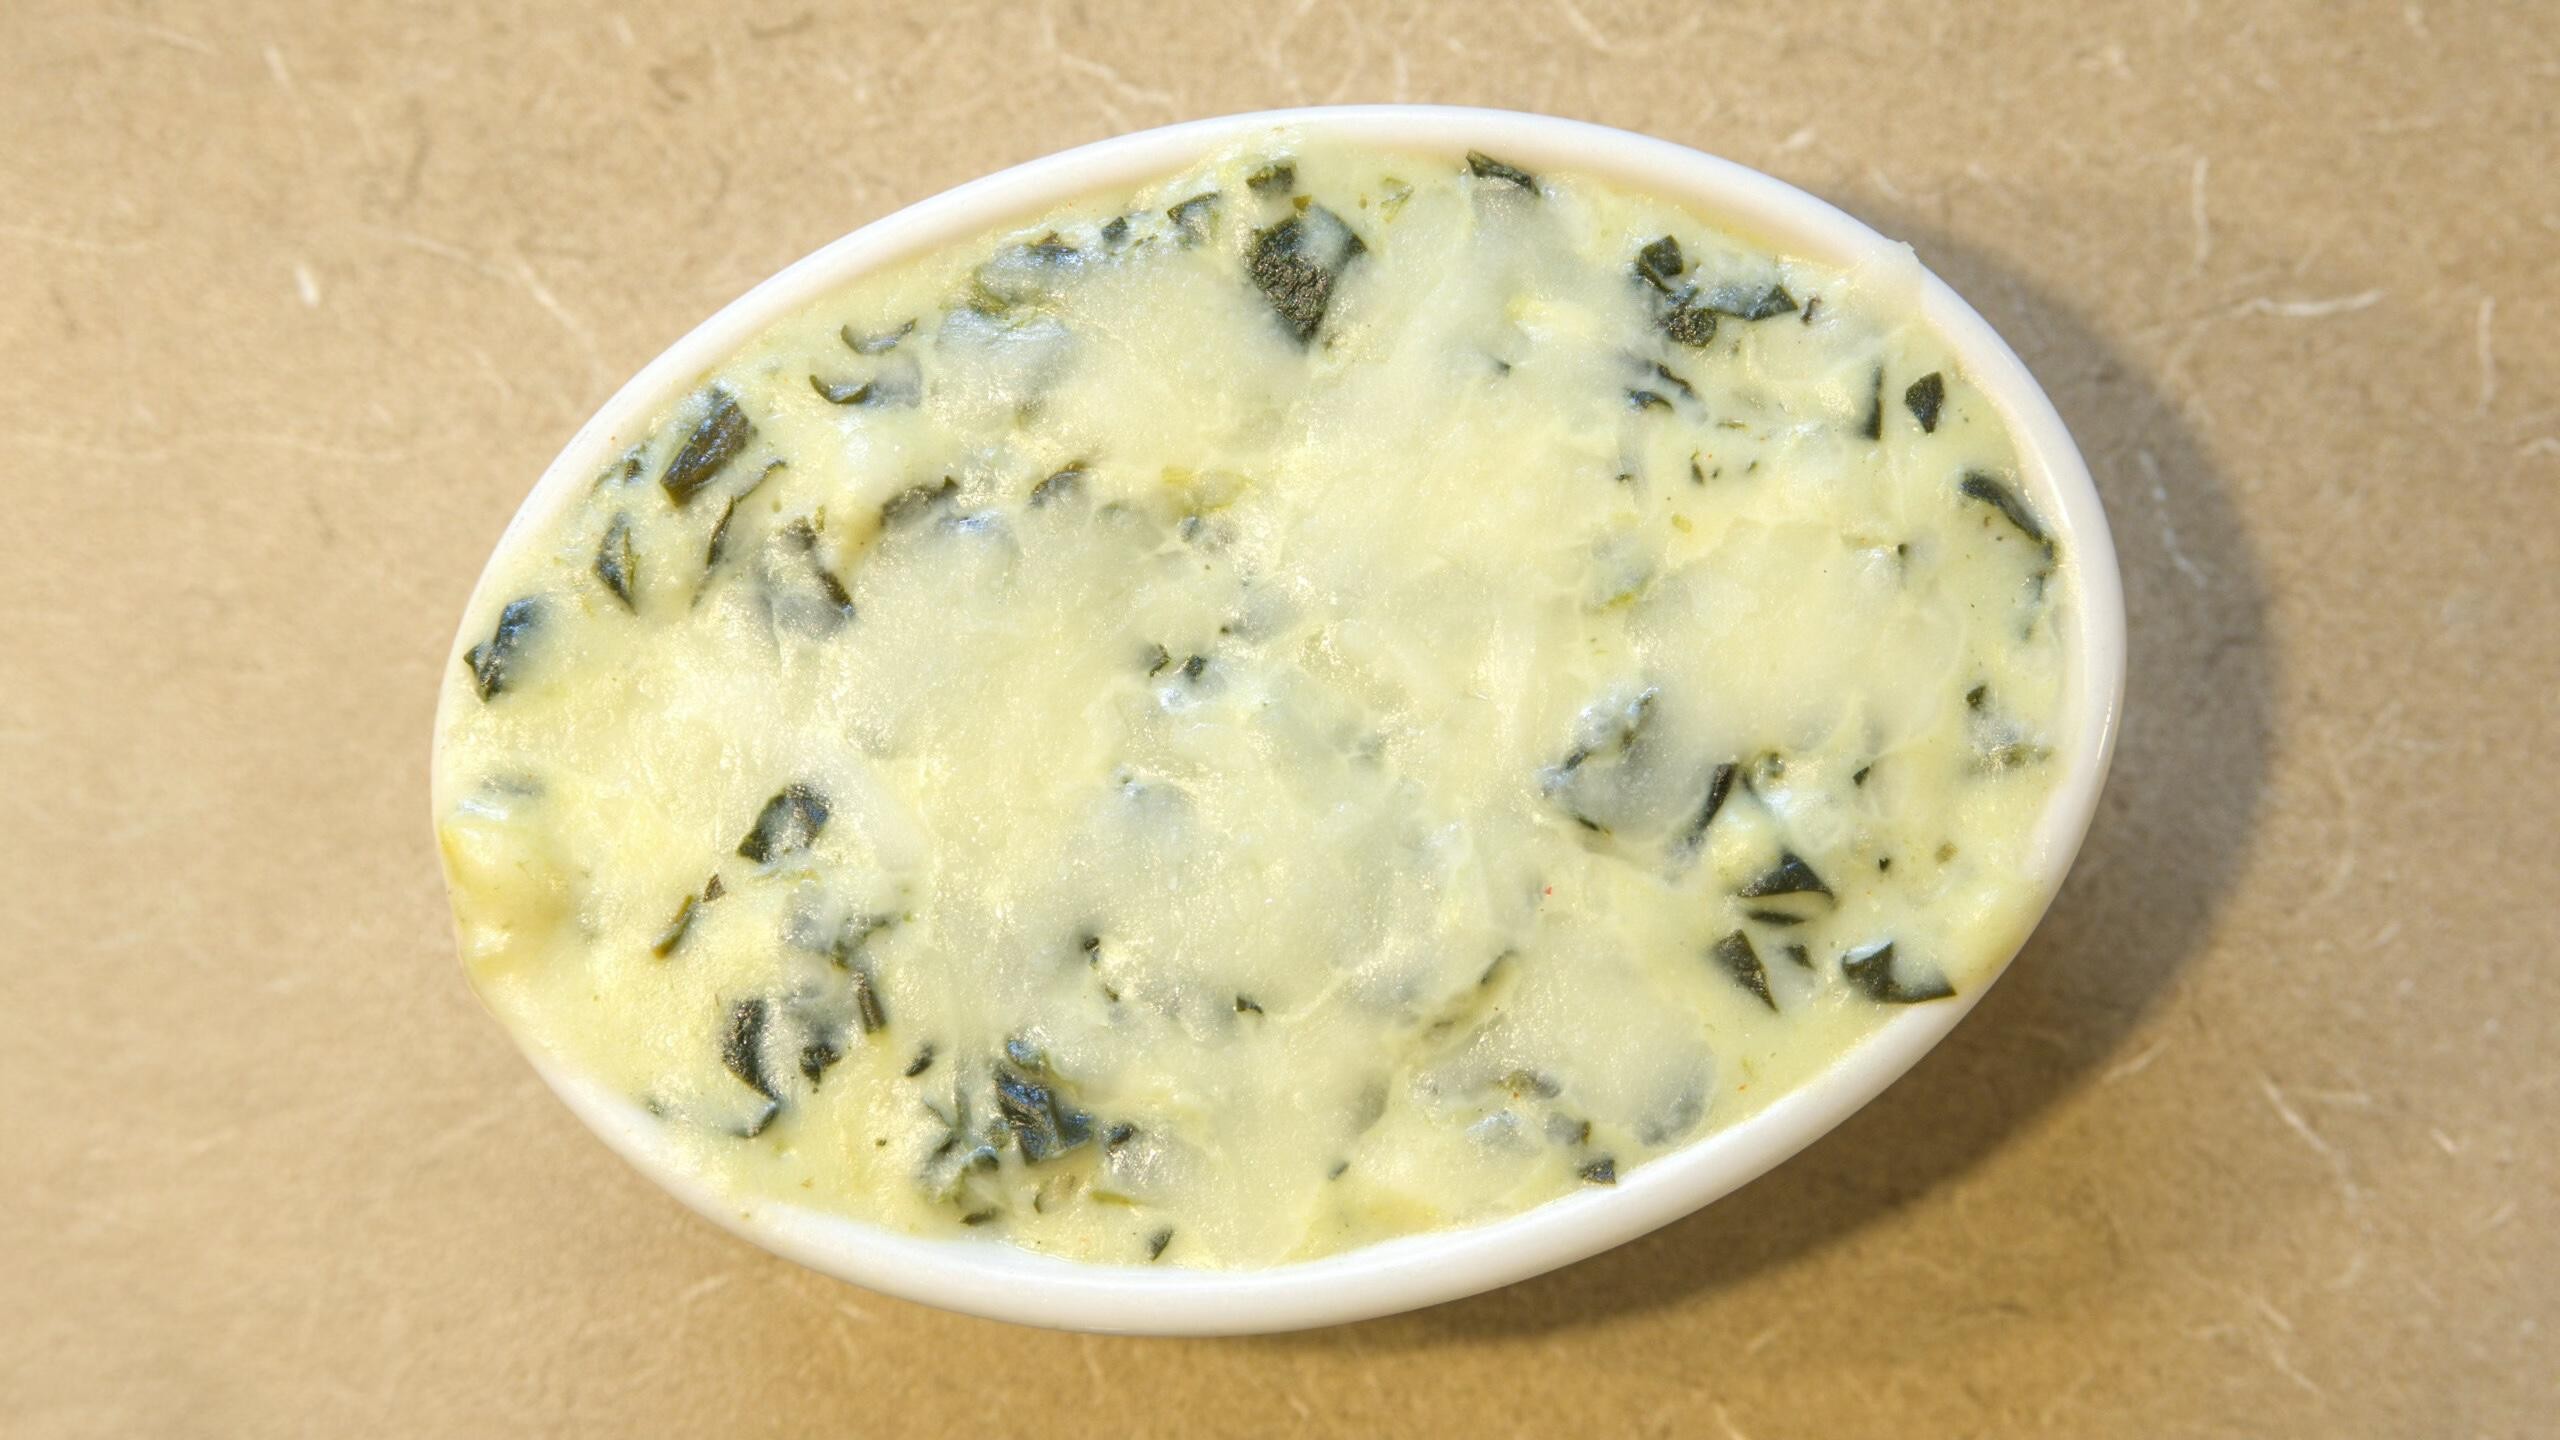 J’s spinach and artichoke dip